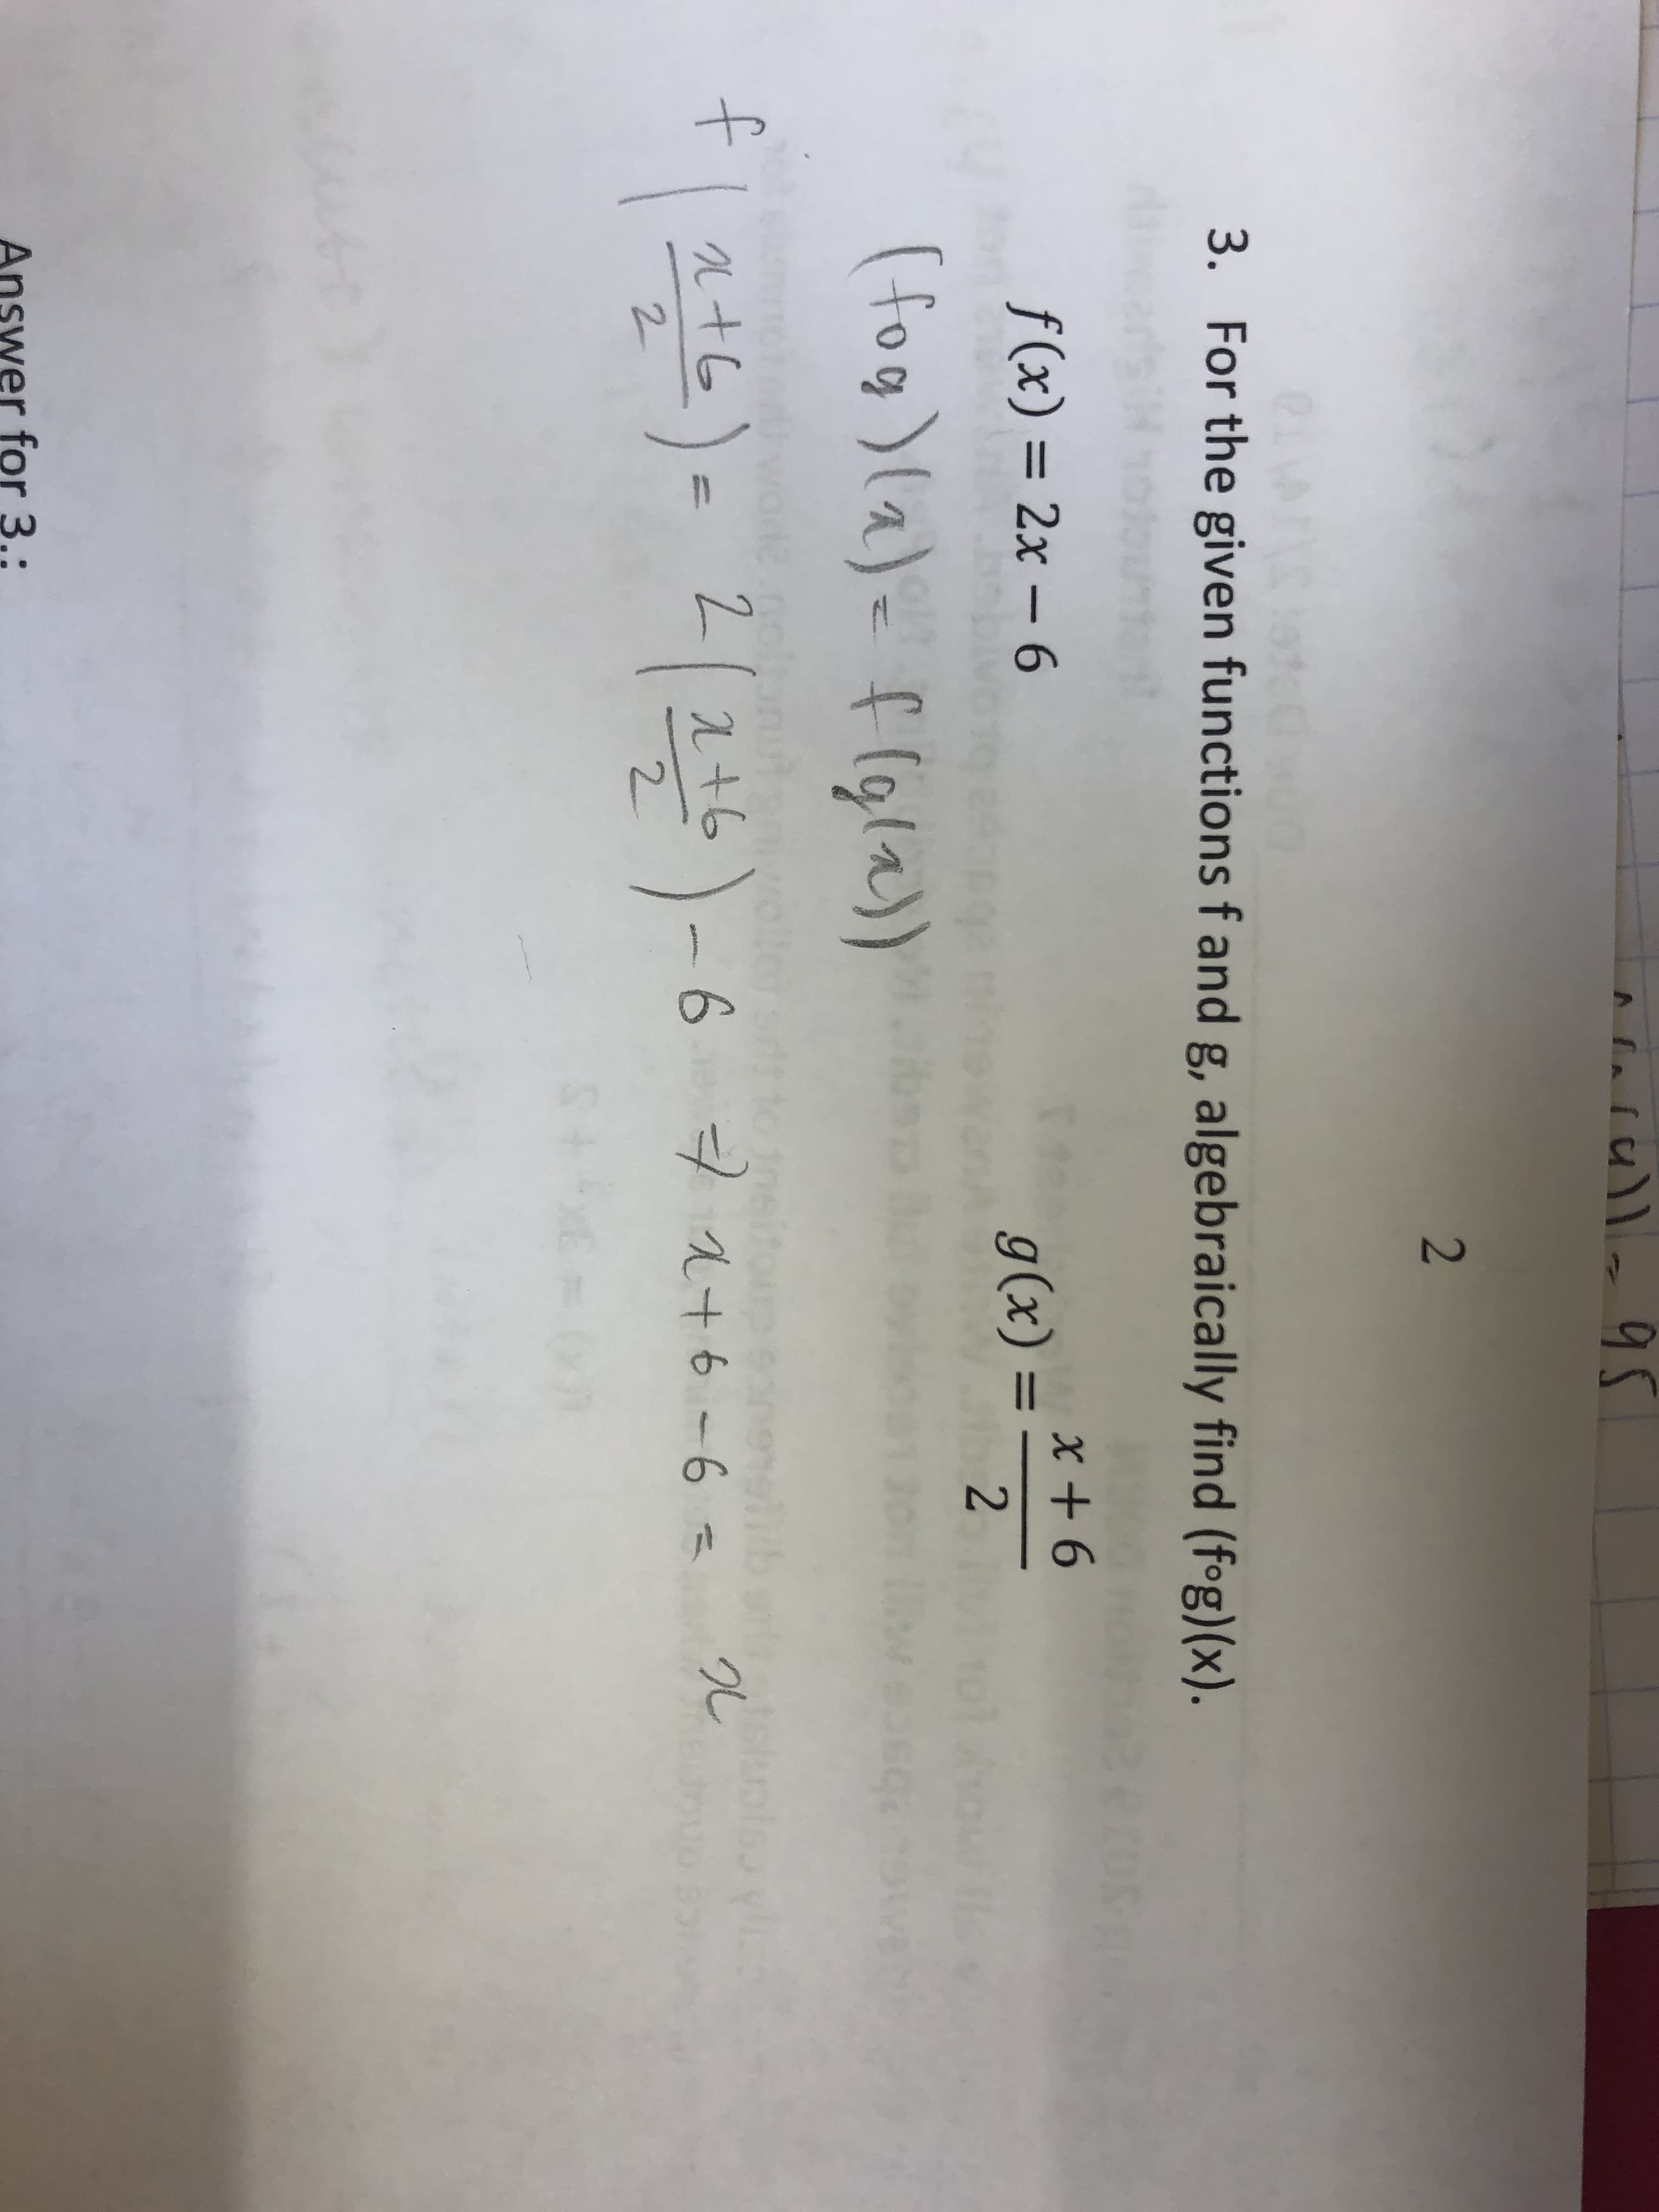 3.
For the given functions f and g, algebraically find (fog)(x).
f(x) 2x -6
x + 6
g (x) =ー2ー
Answer for 3.:
2
